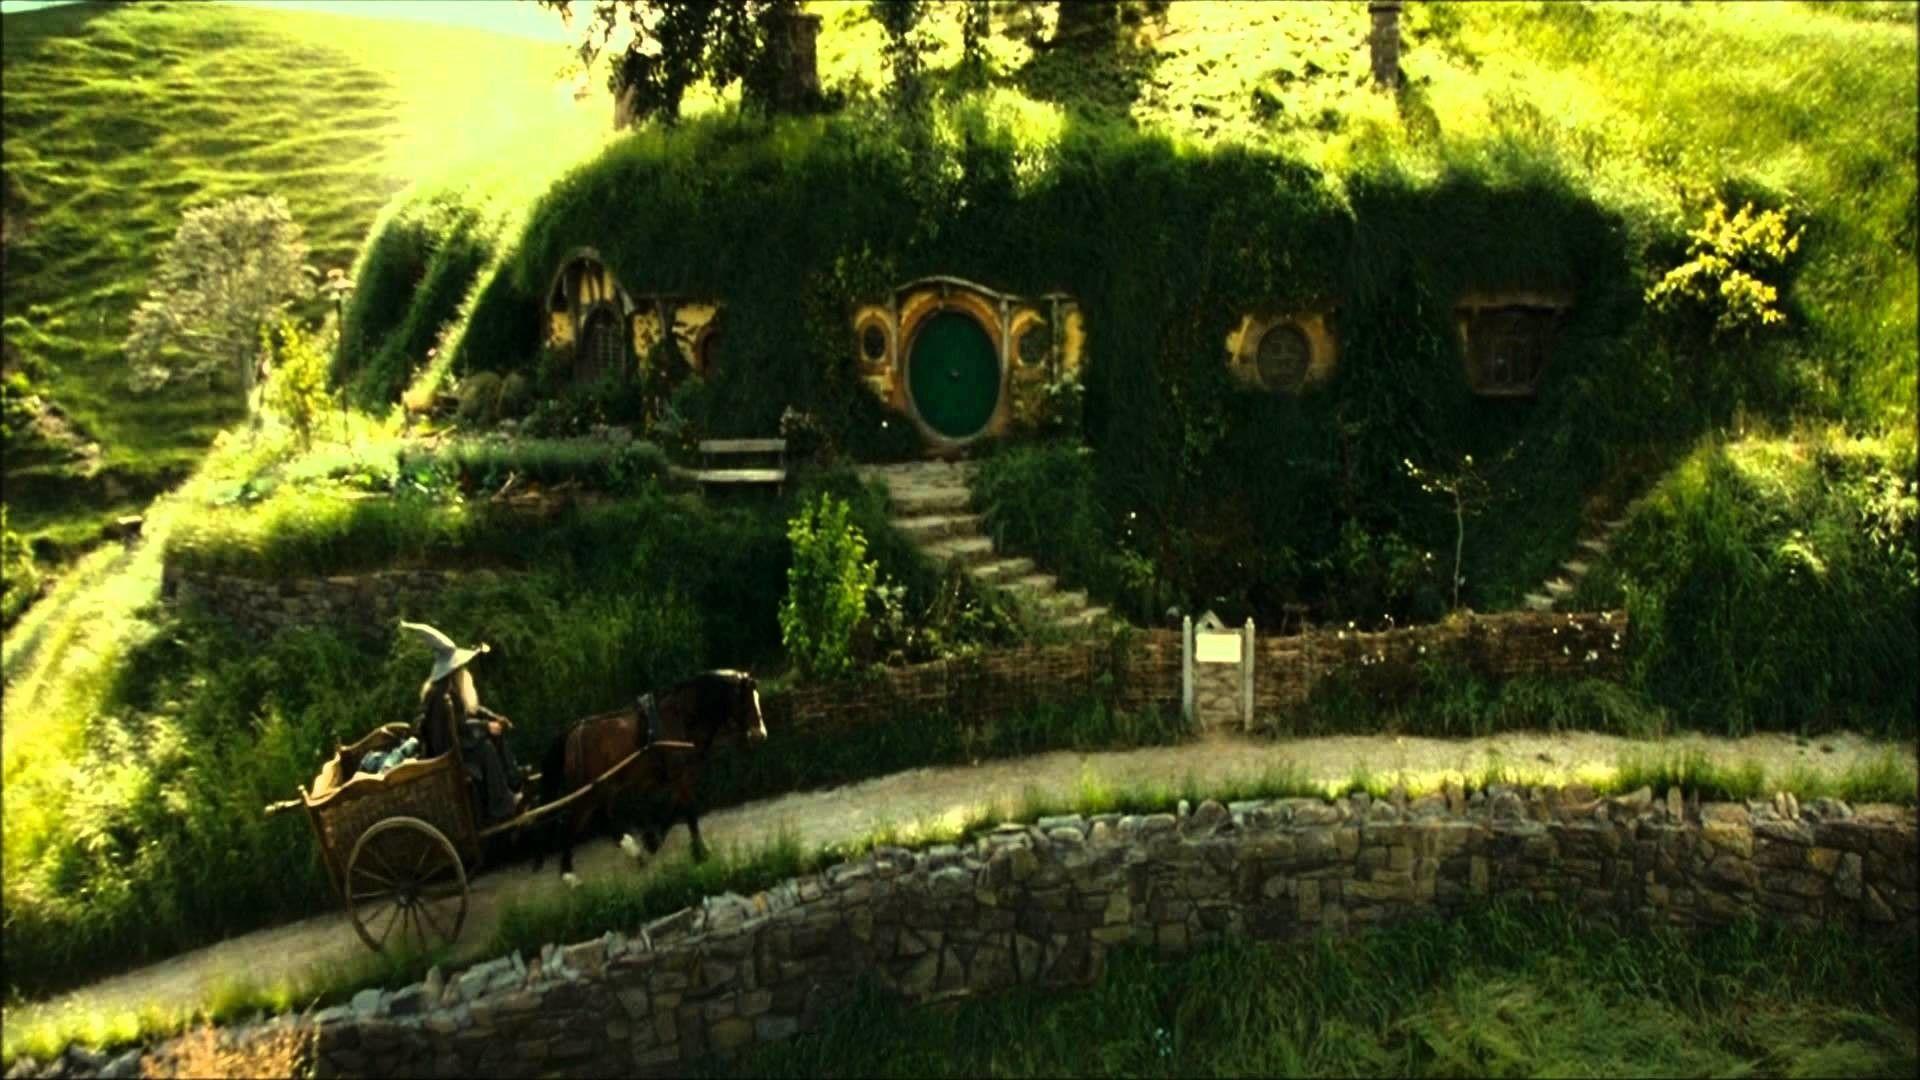 Wallpaper Night The Shire Shir The hobbit The pub images for desktop  section фильмы  download